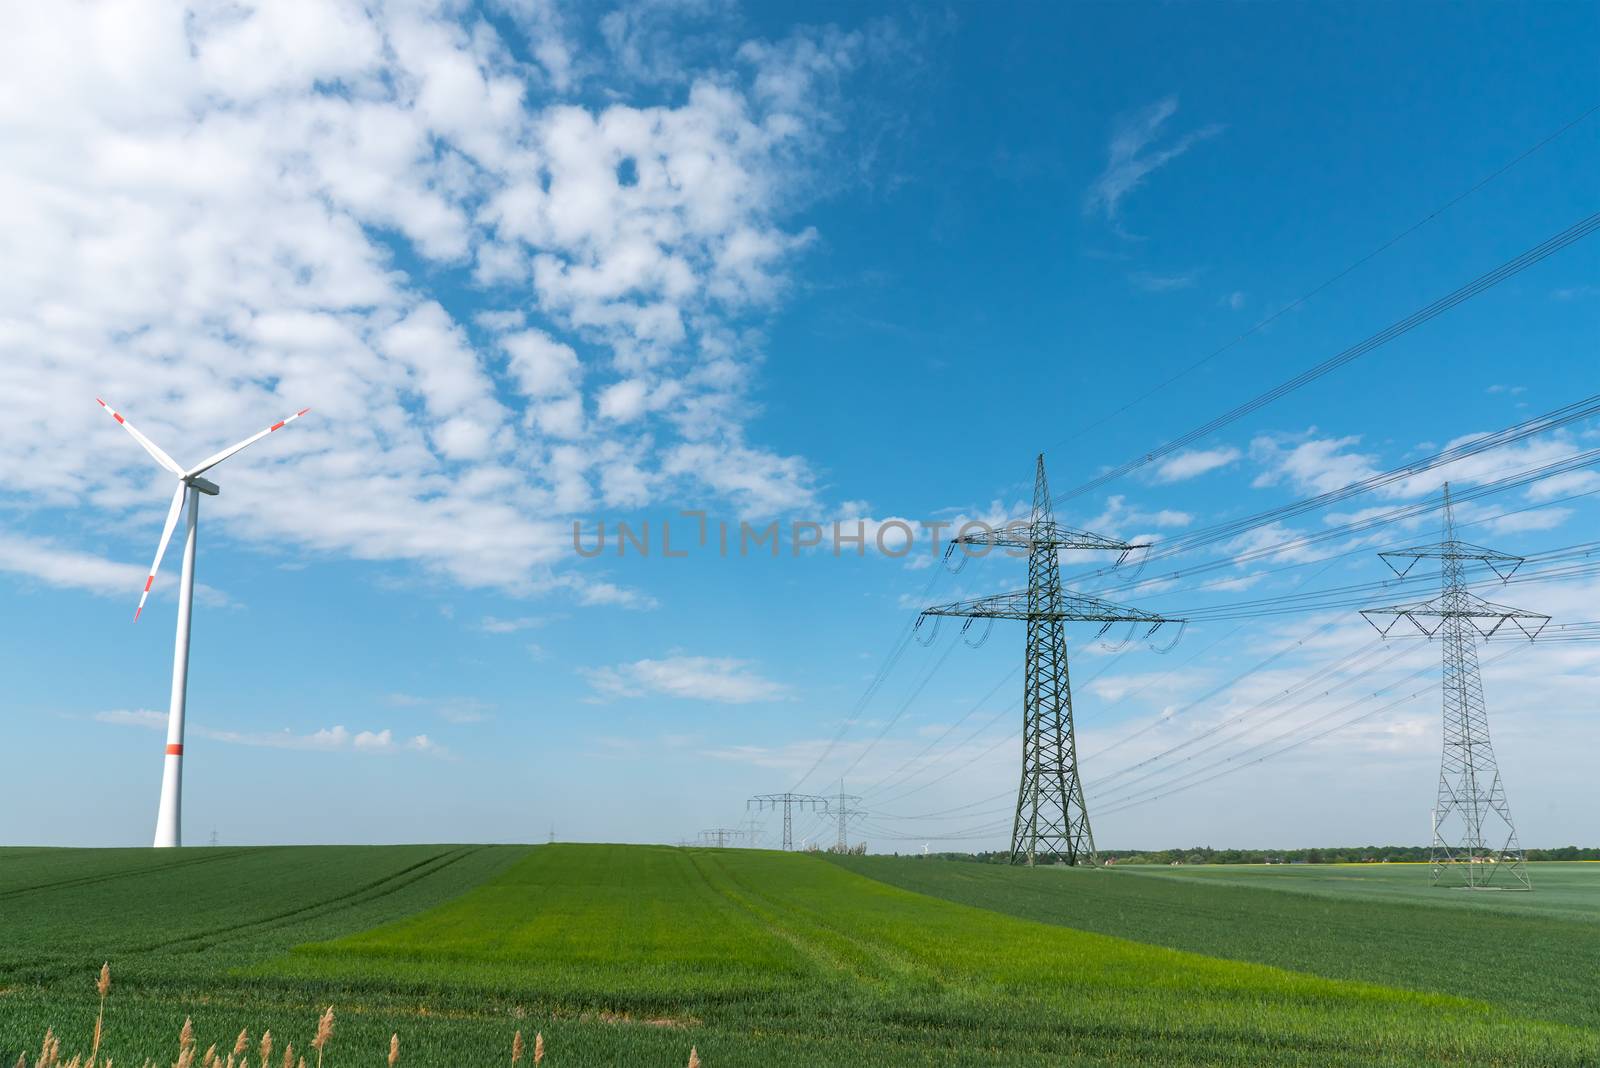 Power lines and a wind turbine seen in rural Germany